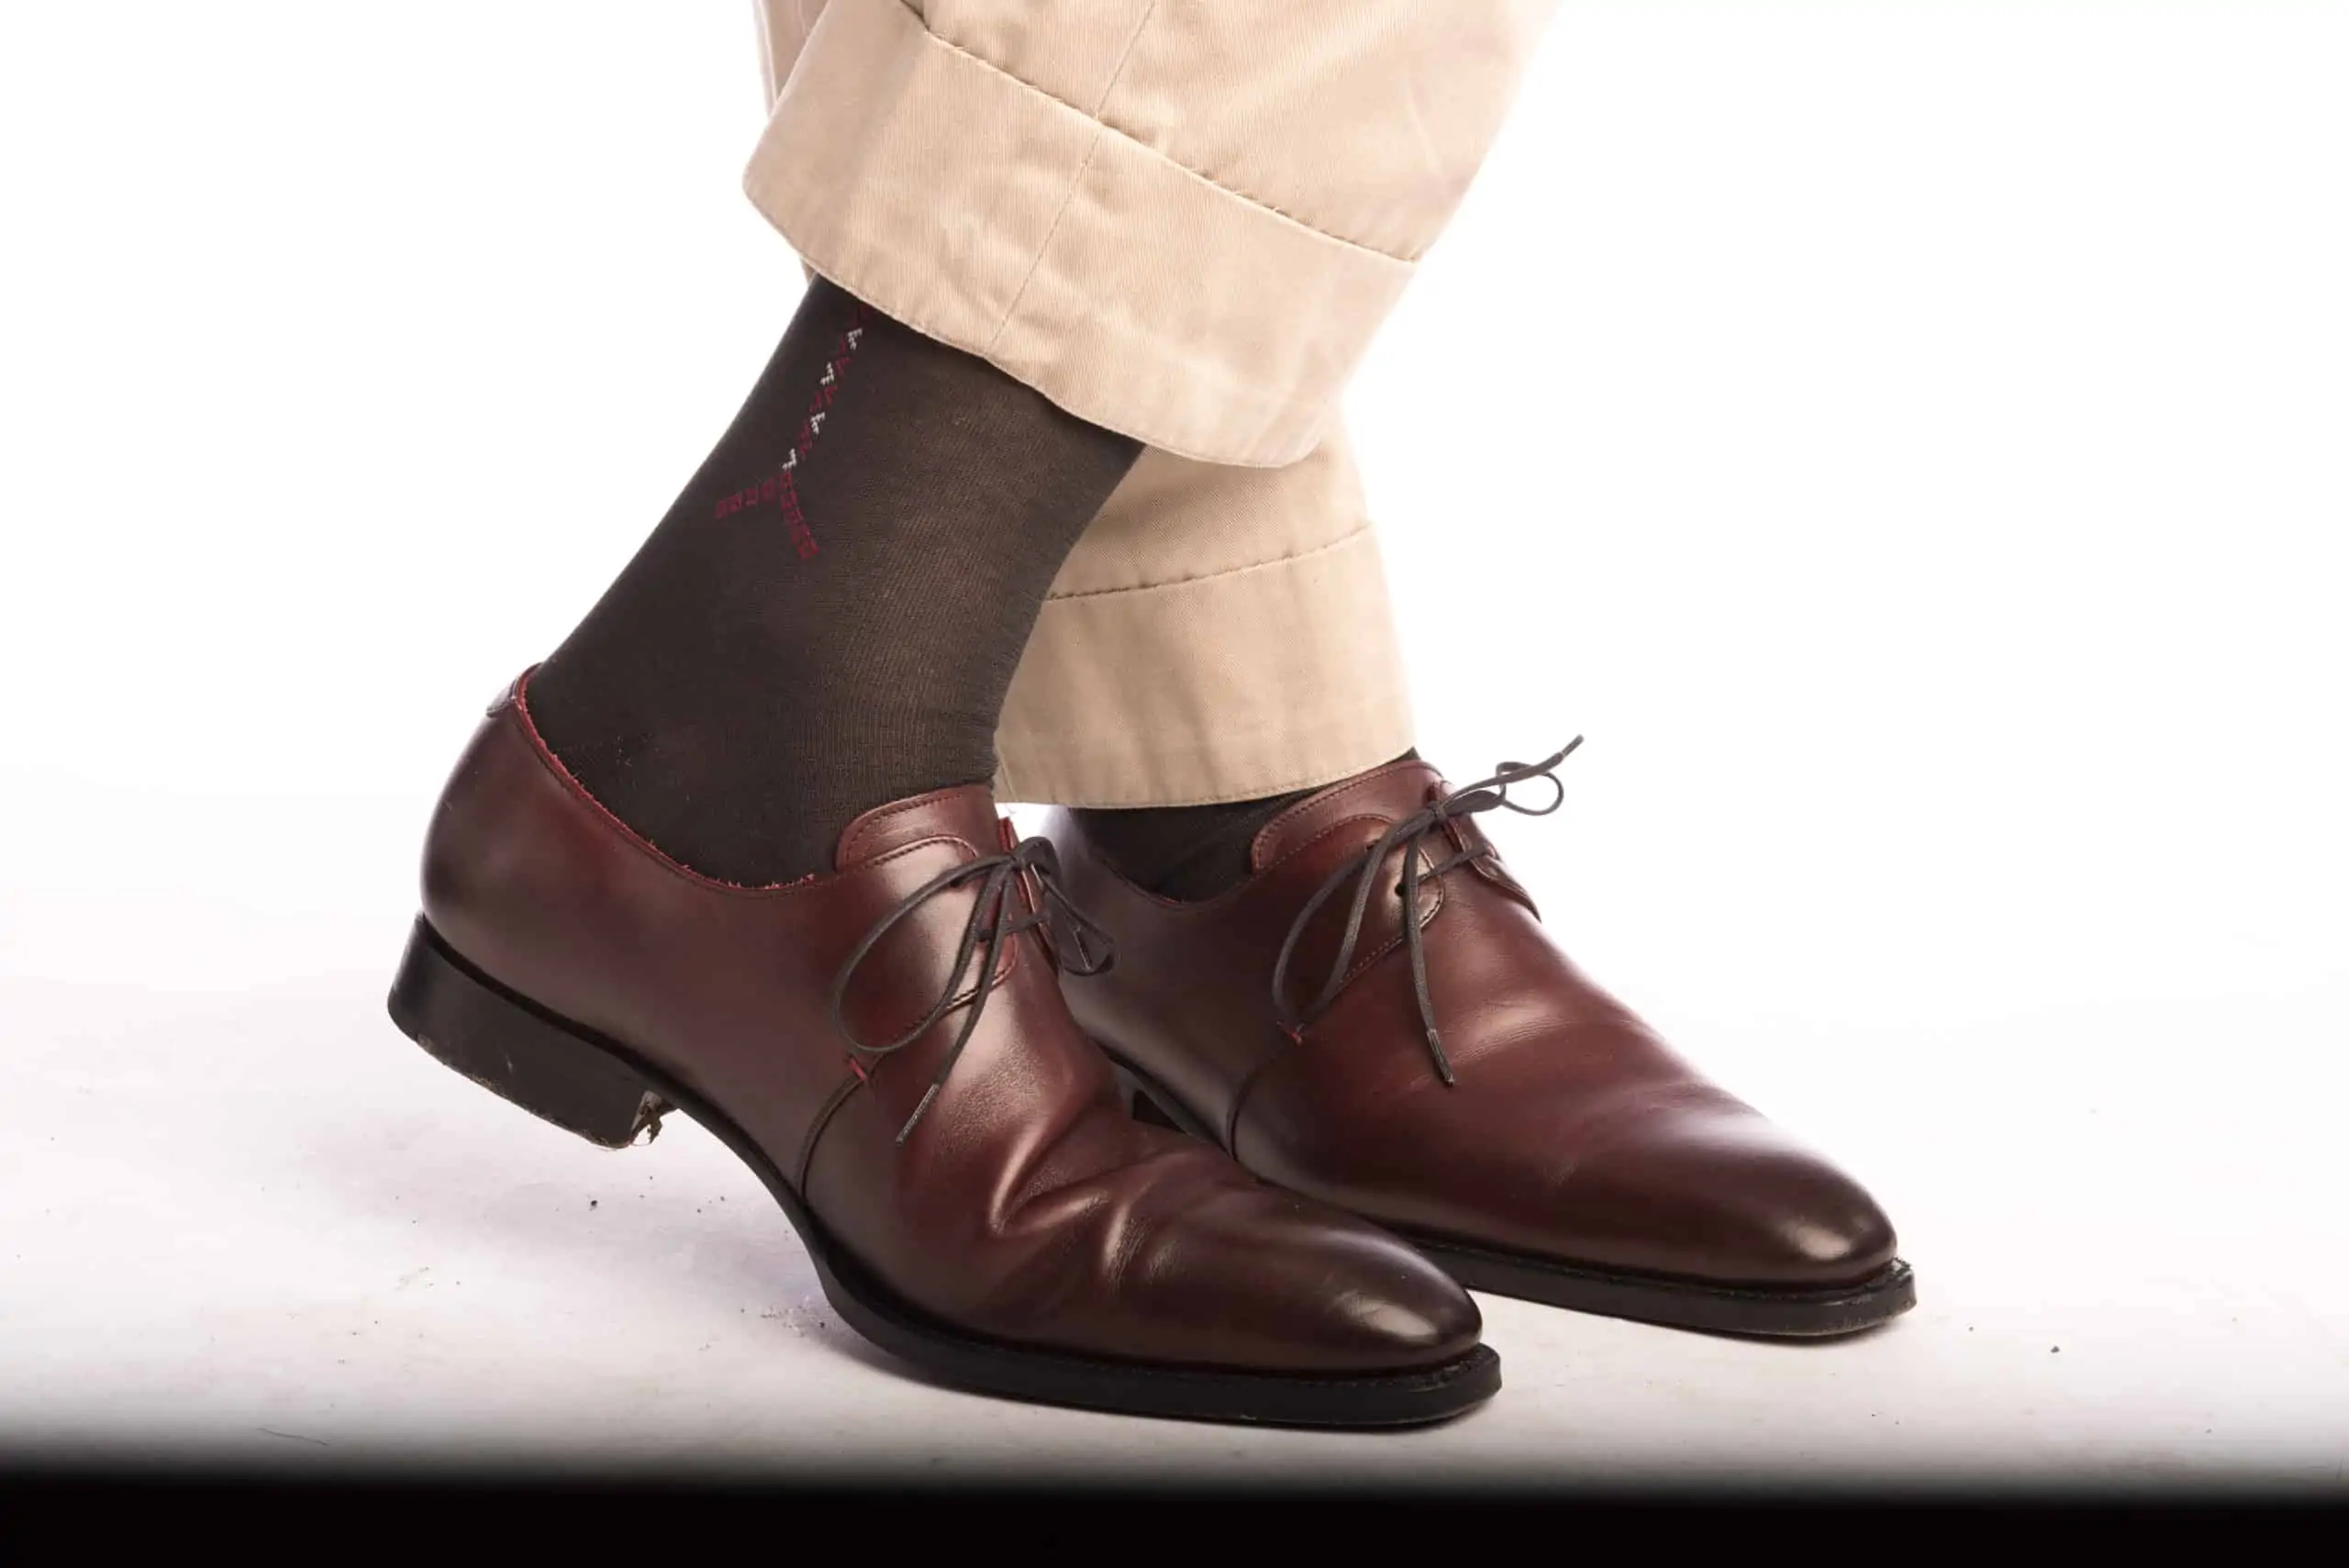 Khaki chinos paired with dark grey socks with burgundy and white clocks from Fort Belvedere and oxblood oxfords